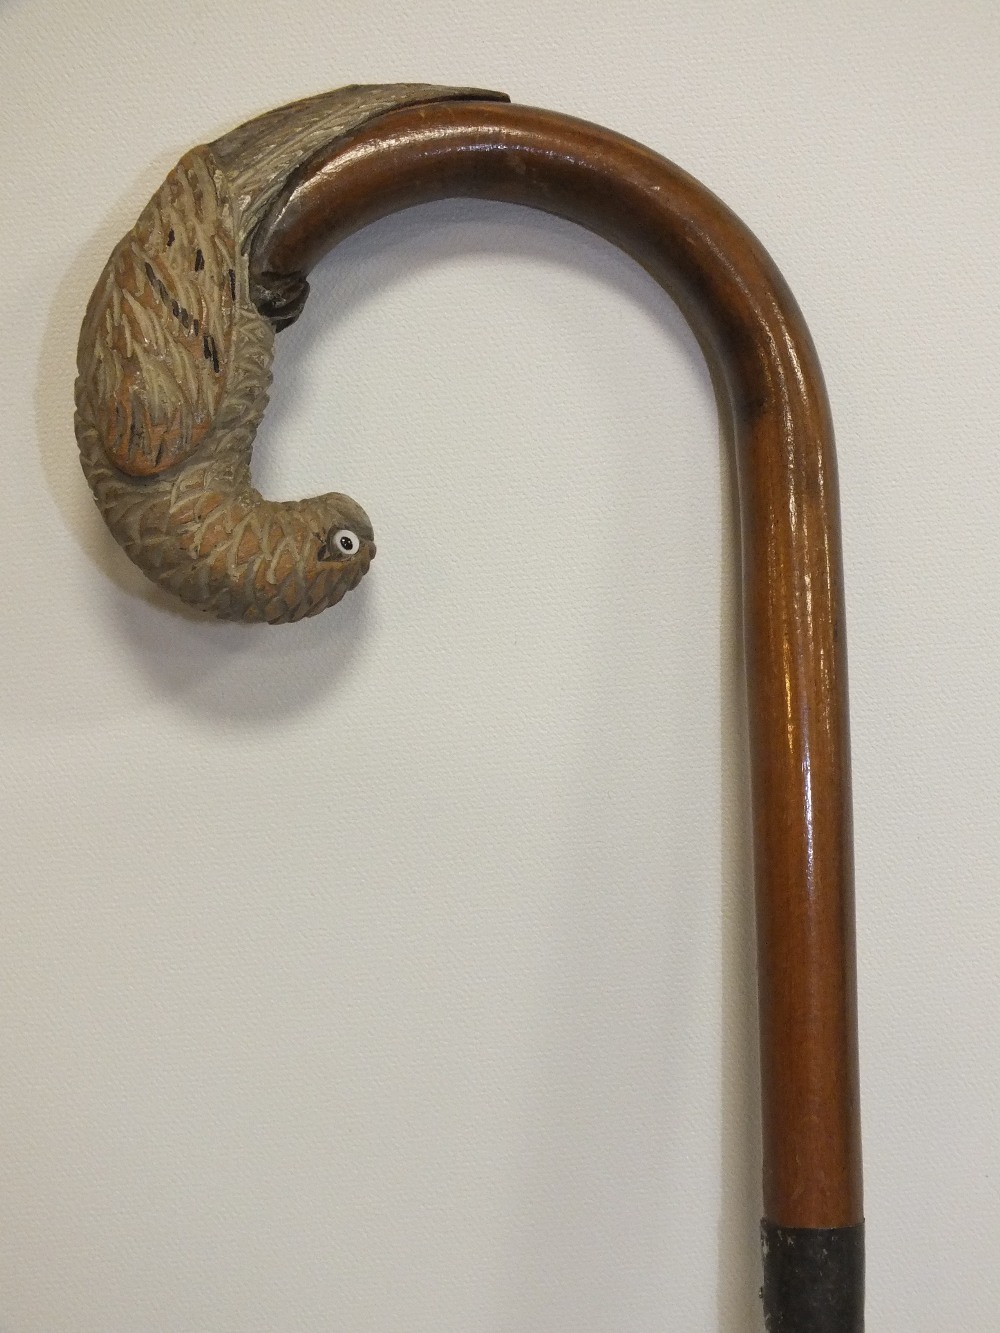 A NOVELTY WALKING CANE WITH CARVED PARROT HANDLE, L 88 cm